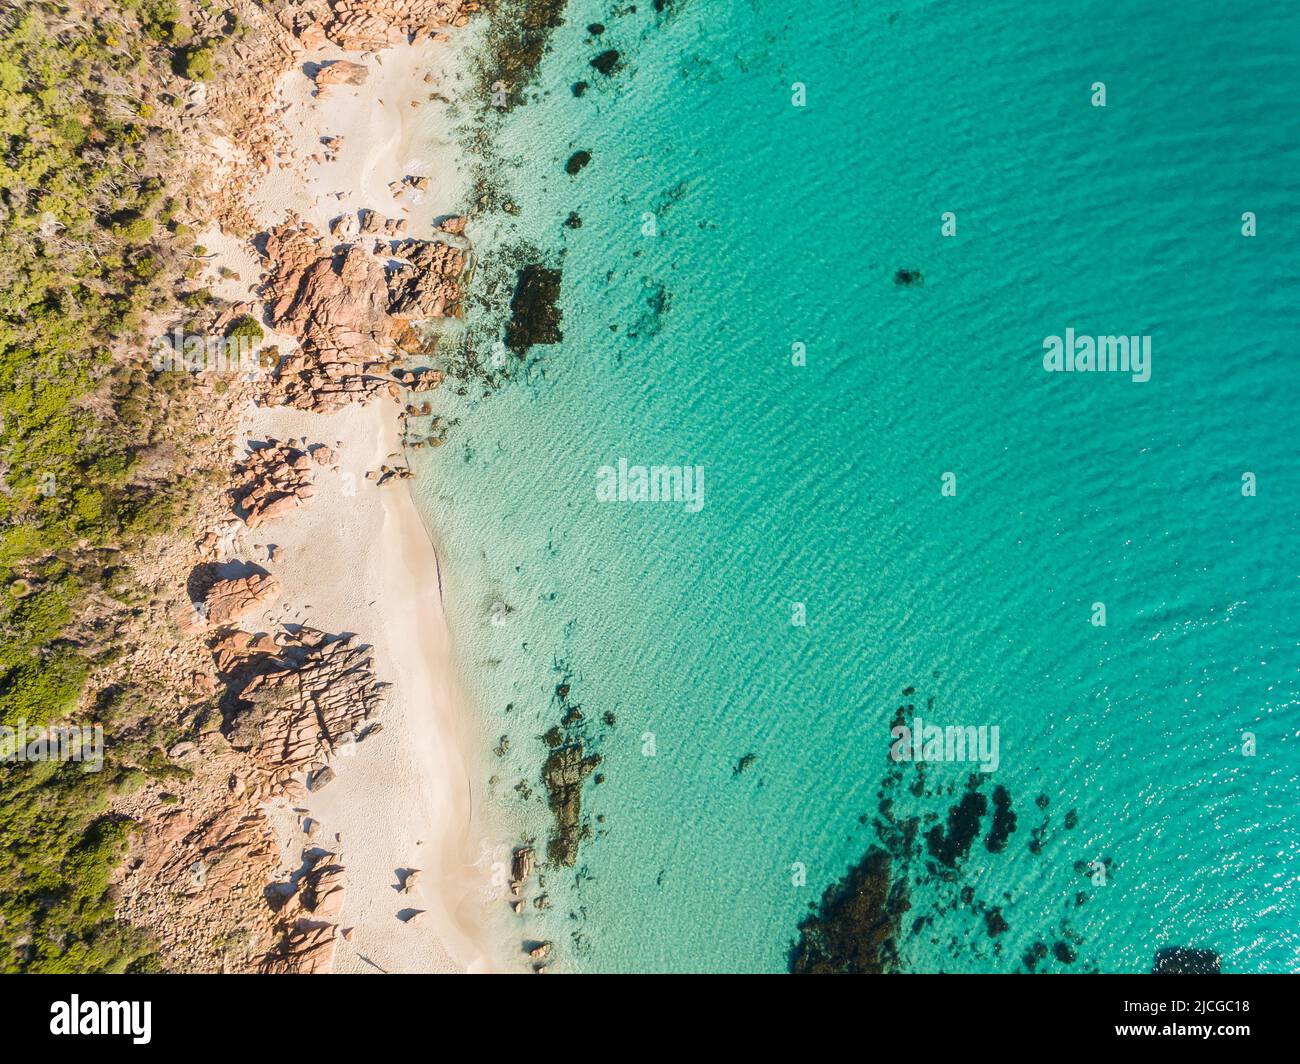 Clear turquoise waters of the rocky coast of Meelup Beach, Dunsborough Western Australia Stock Photo